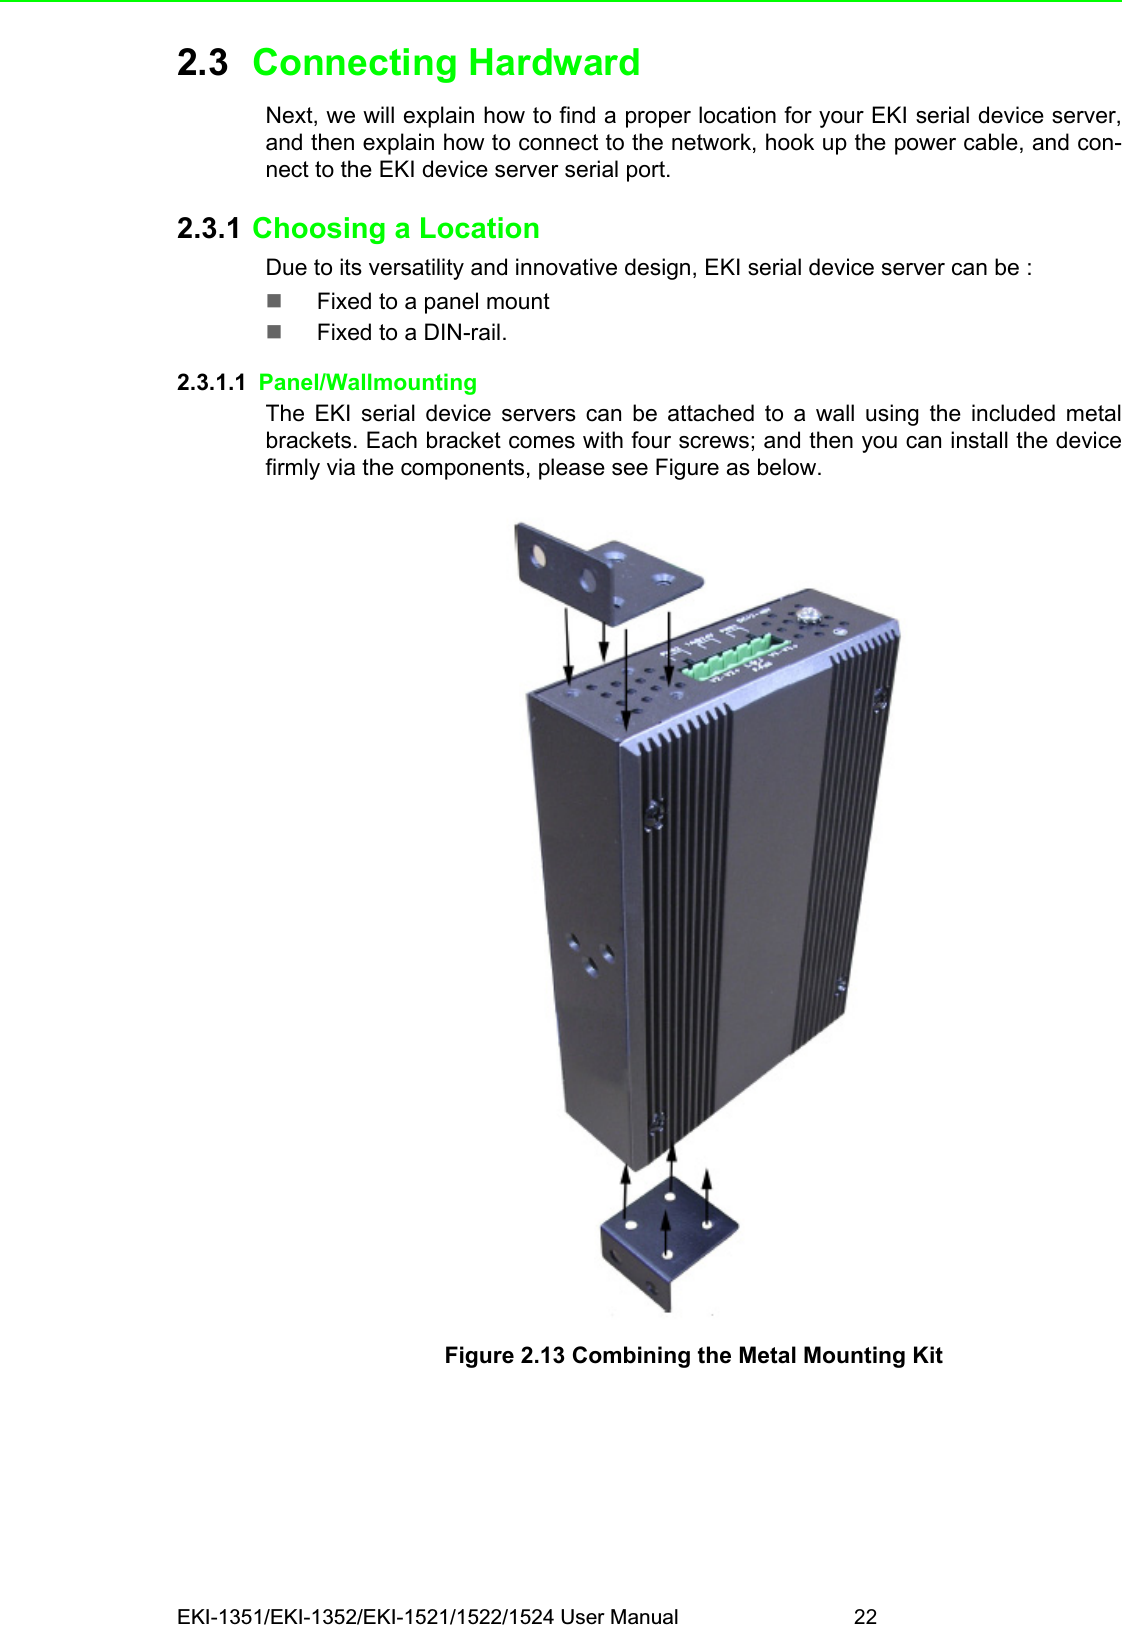 EKI-1351/EKI-1352/EKI-1521/1522/1524 User Manual 222.3 Connecting HardwardNext, we will explain how to find a proper location for your EKI serial device server,and then explain how to connect to the network, hook up the power cable, and con-nect to the EKI device server serial port. 2.3.1 Choosing a LocationDue to its versatility and innovative design, EKI serial device server can be :Fixed to a panel mountFixed to a DIN-rail. 2.3.1.1  Panel/WallmountingThe EKI serial device servers can be attached to a wall using the included metalbrackets. Each bracket comes with four screws; and then you can install the devicefirmly via the components, please see Figure as below.Figure 2.13 Combining the Metal Mounting Kit